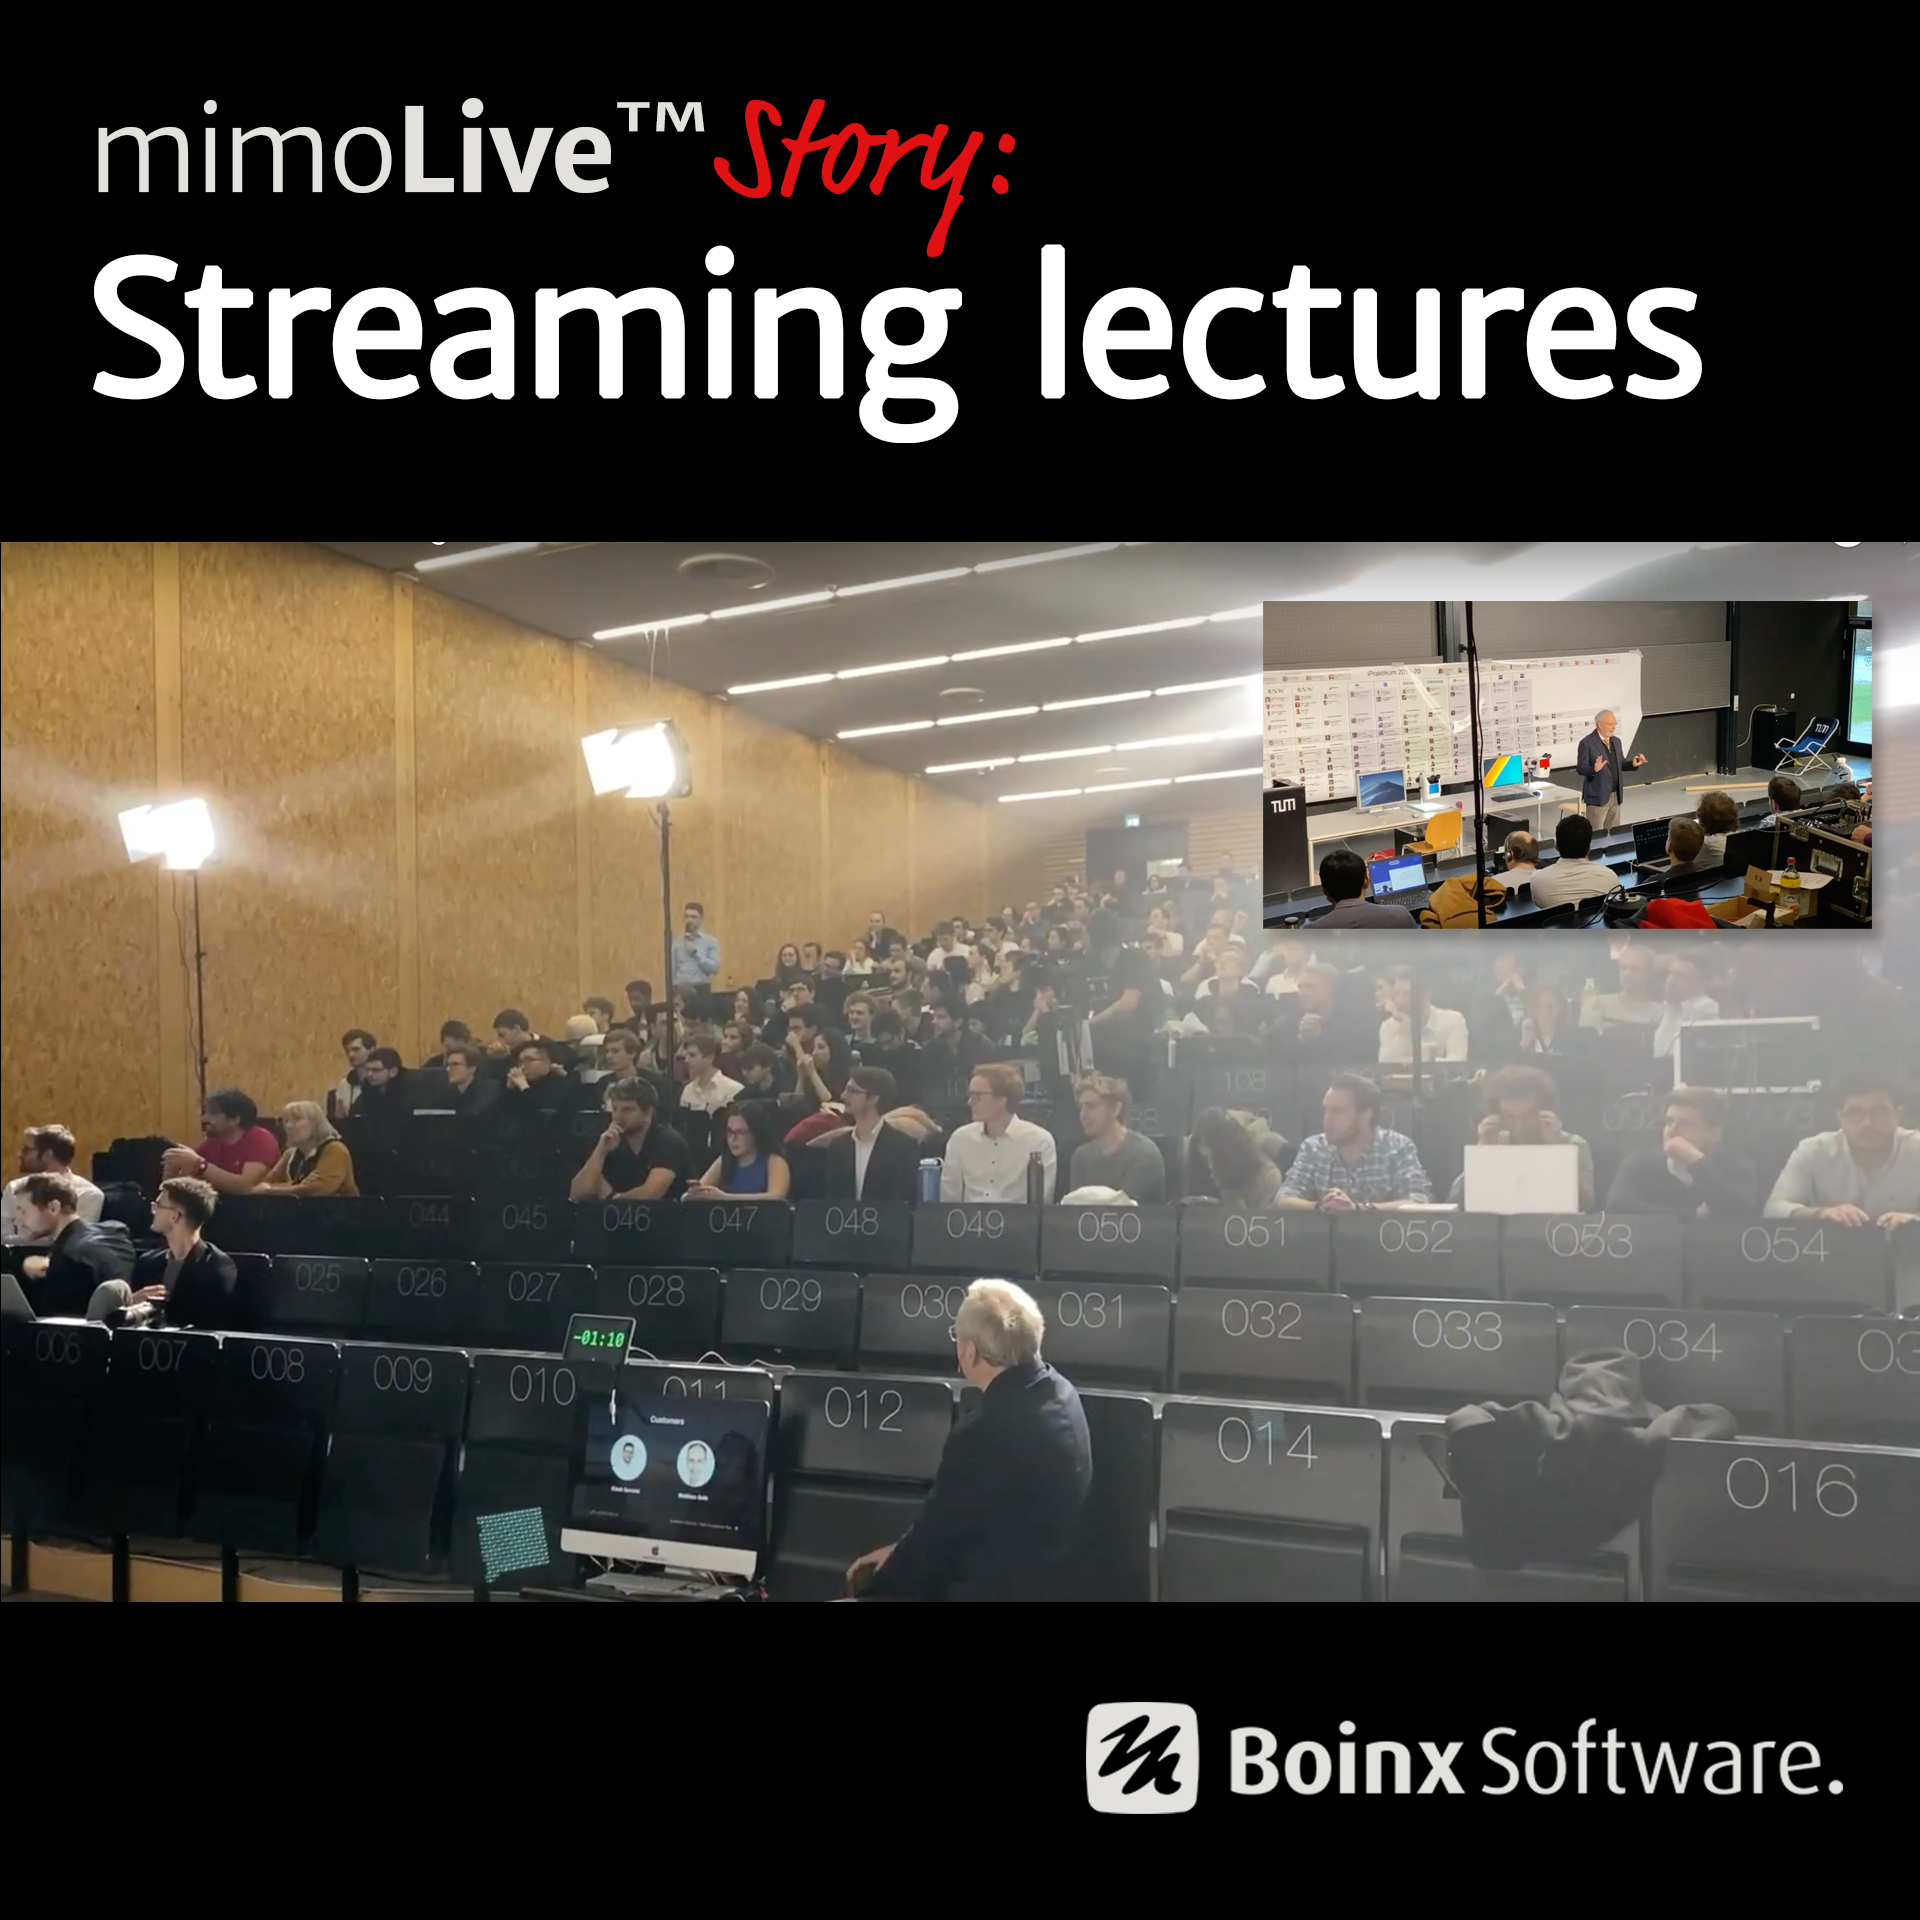 Streaming lectures